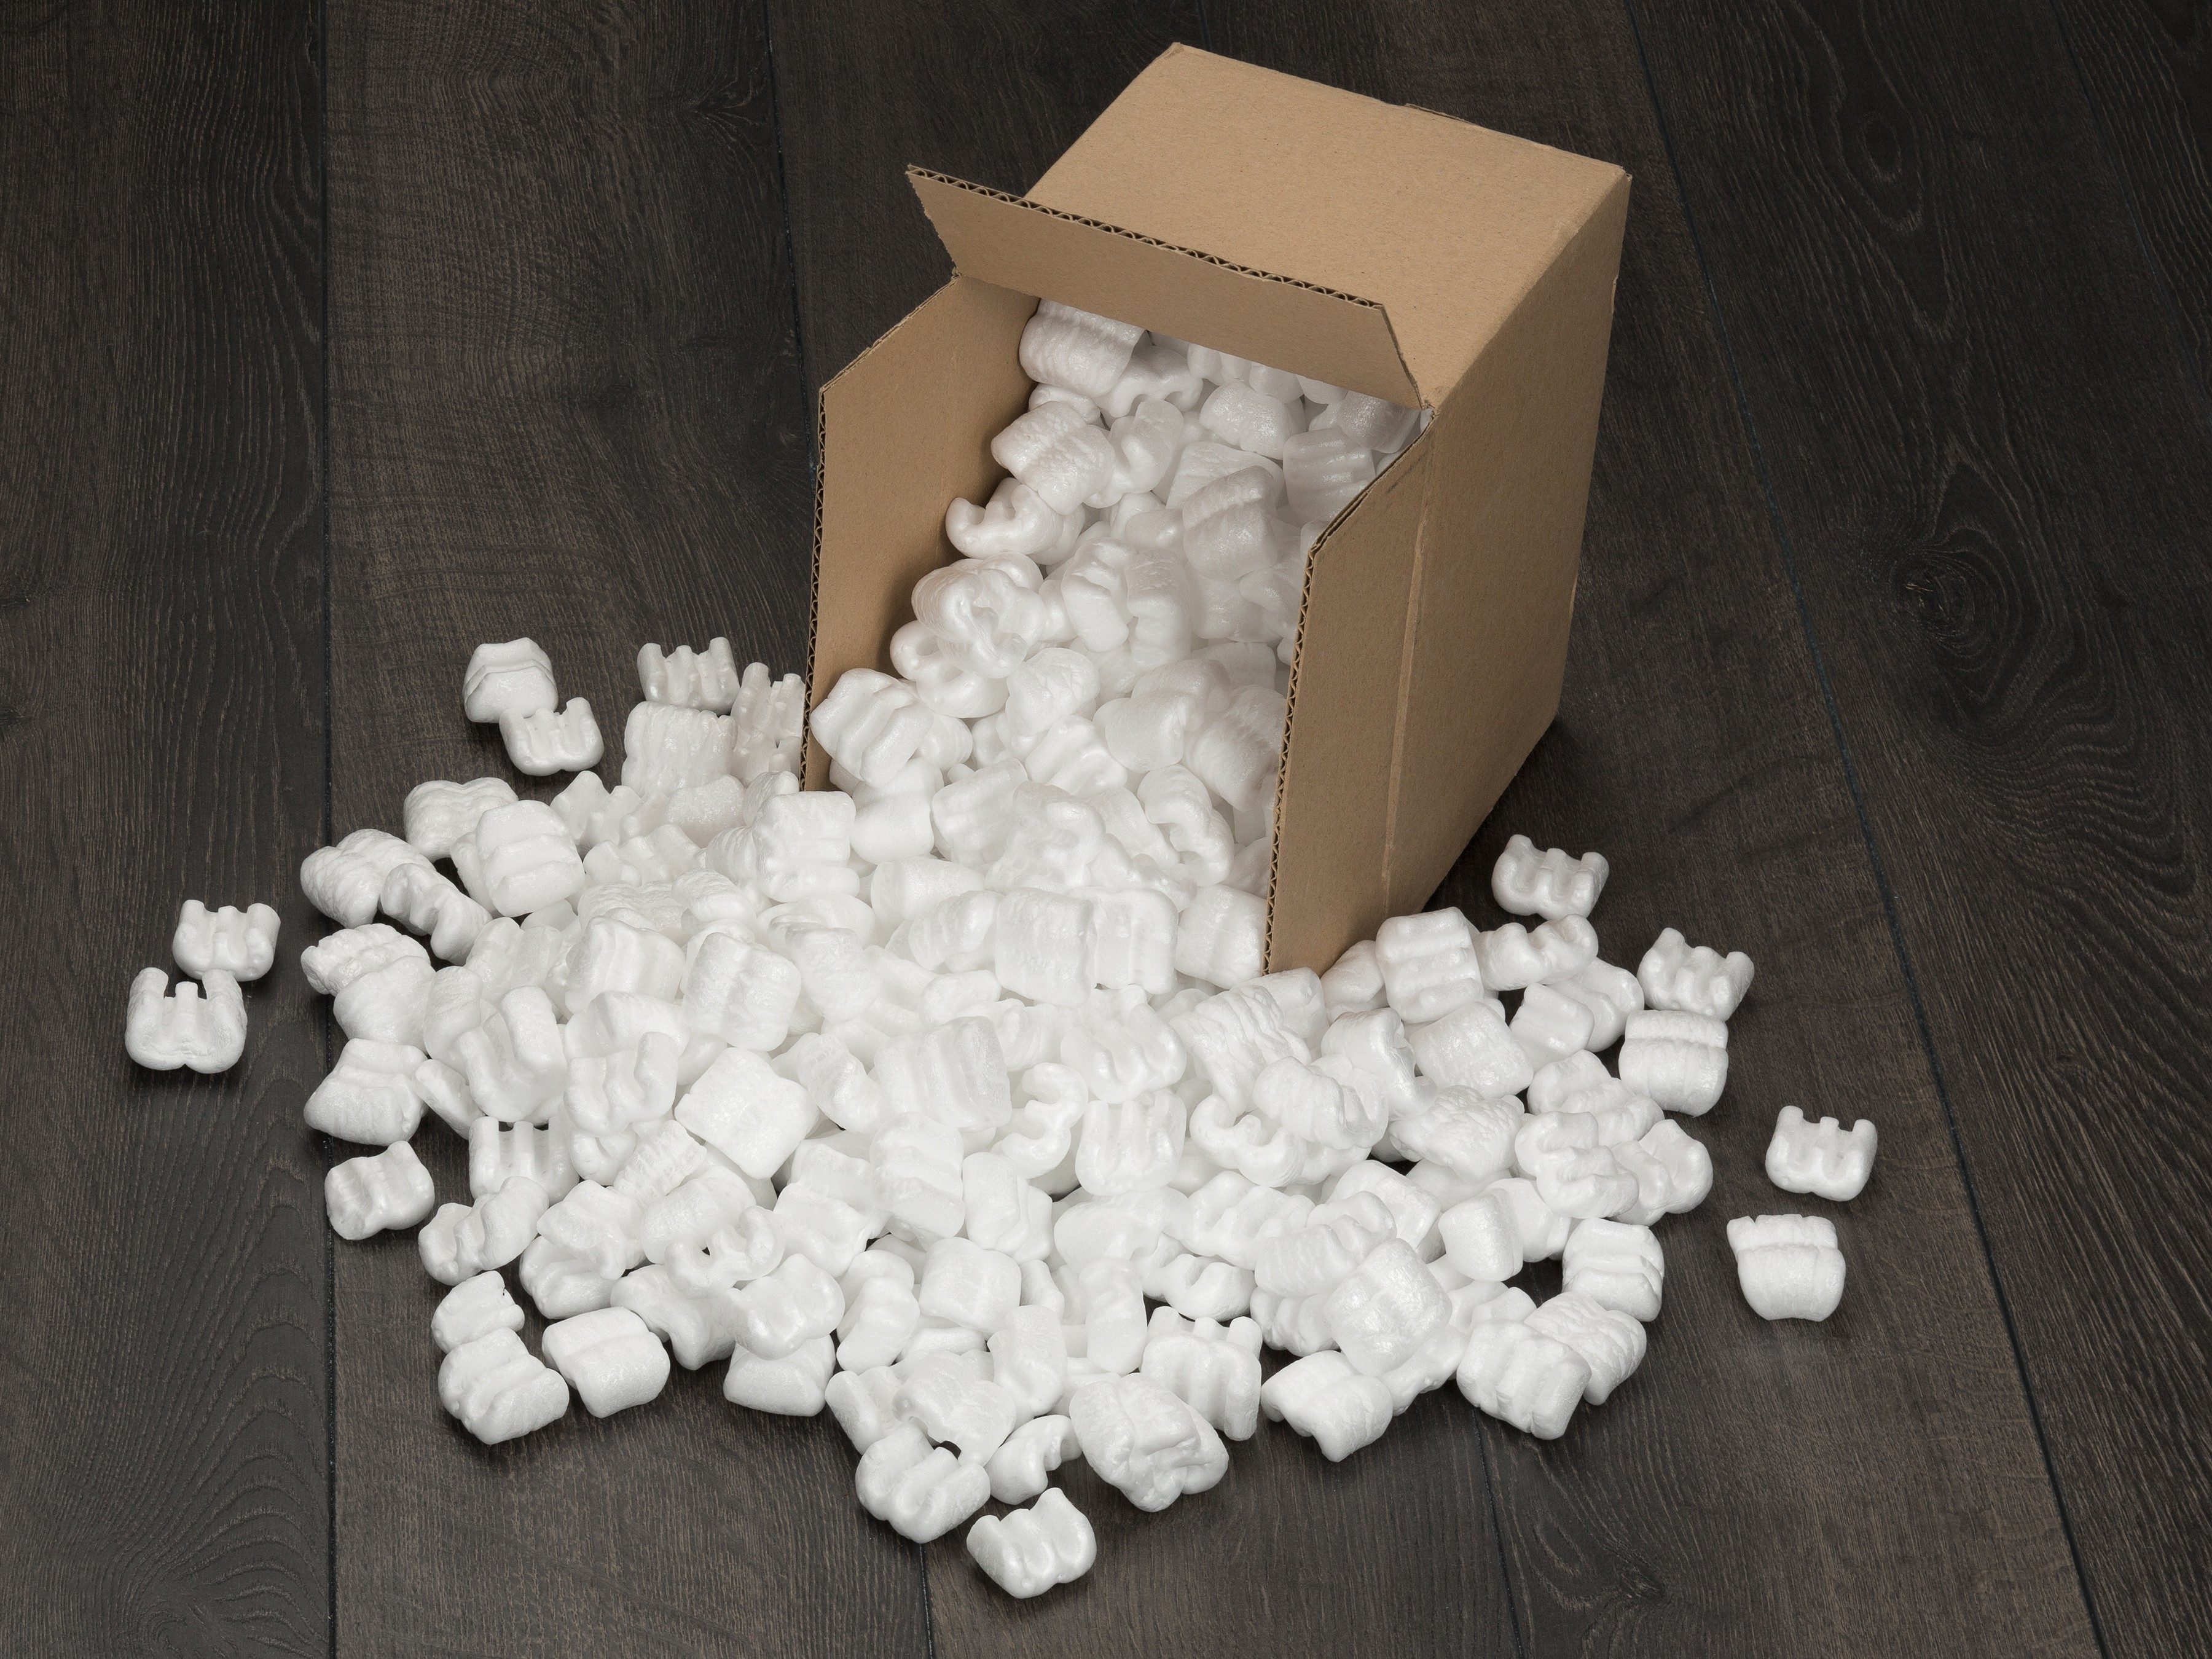 4. Use Styrofoam to Make Your Own Shipping Pellets